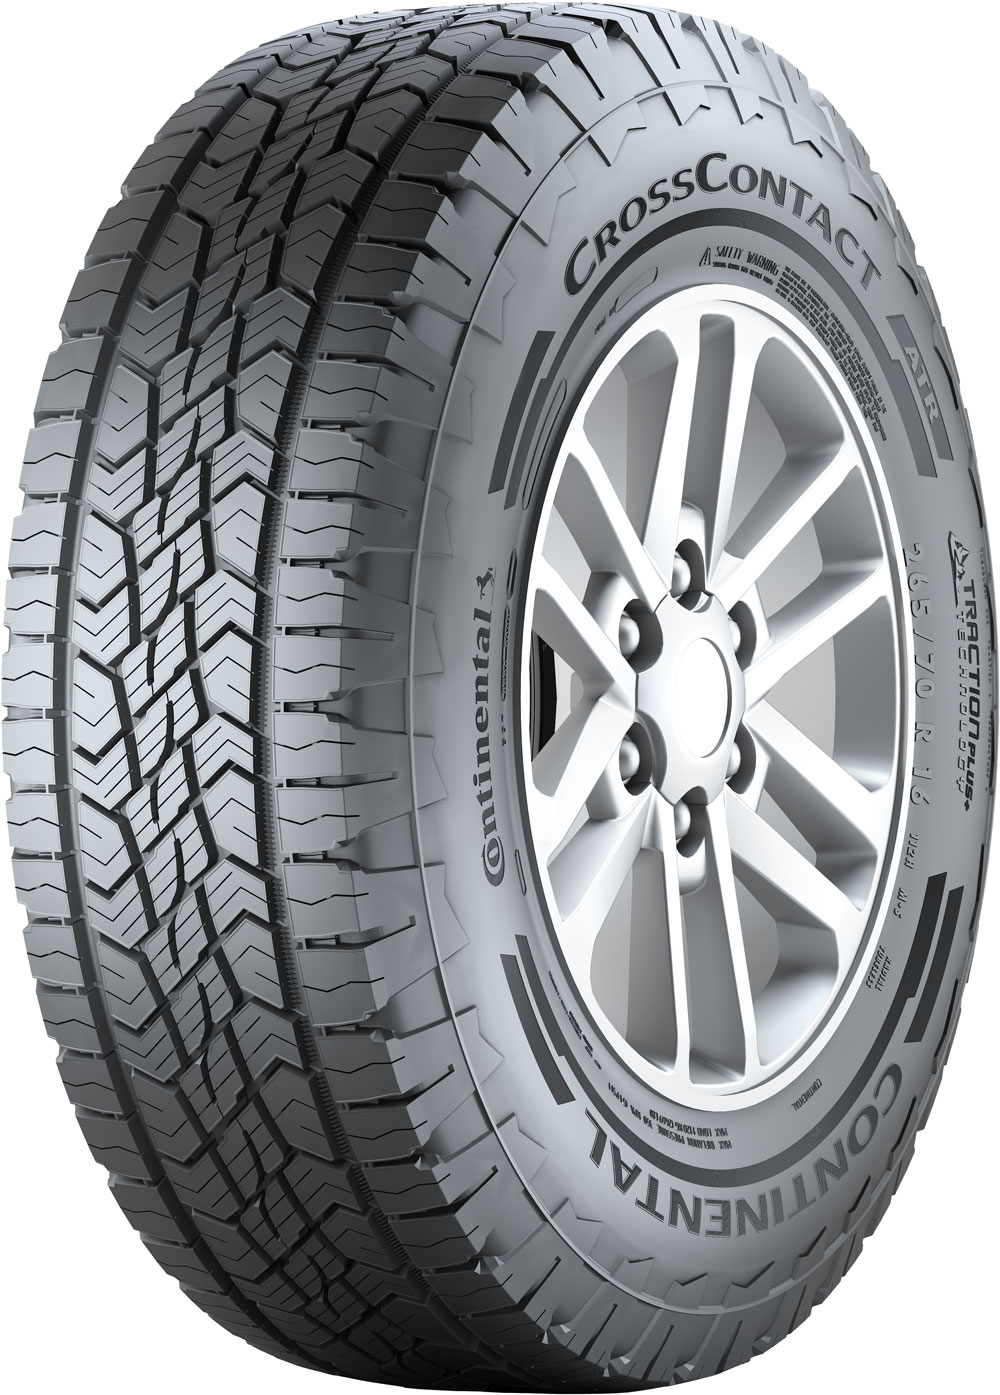 Anvelope auto CONTINENTAL Cross Contact ATR FP 205/70 R15 96